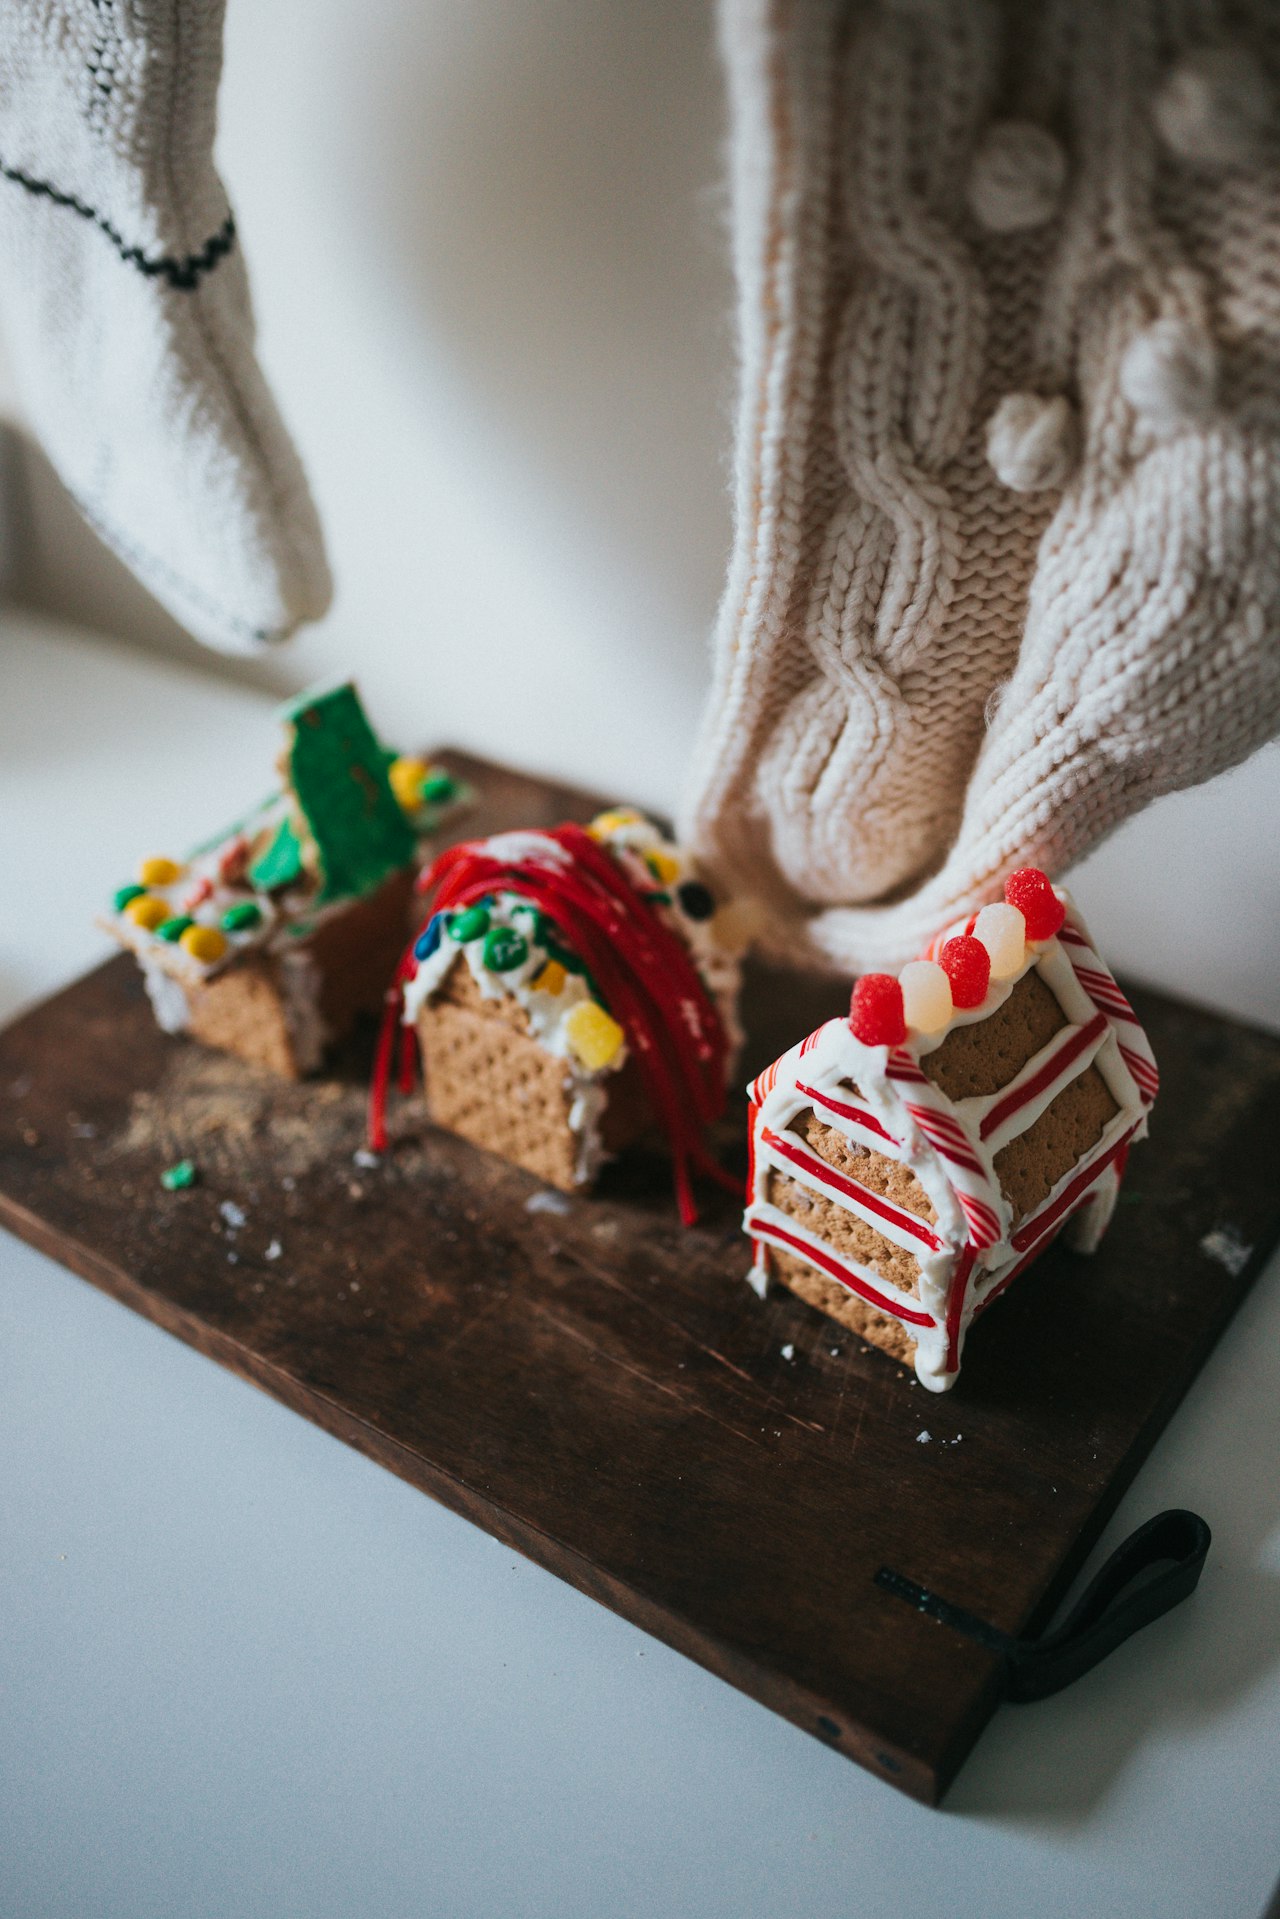 Tis the Season: The Art of Selling Your Home During the Holidays